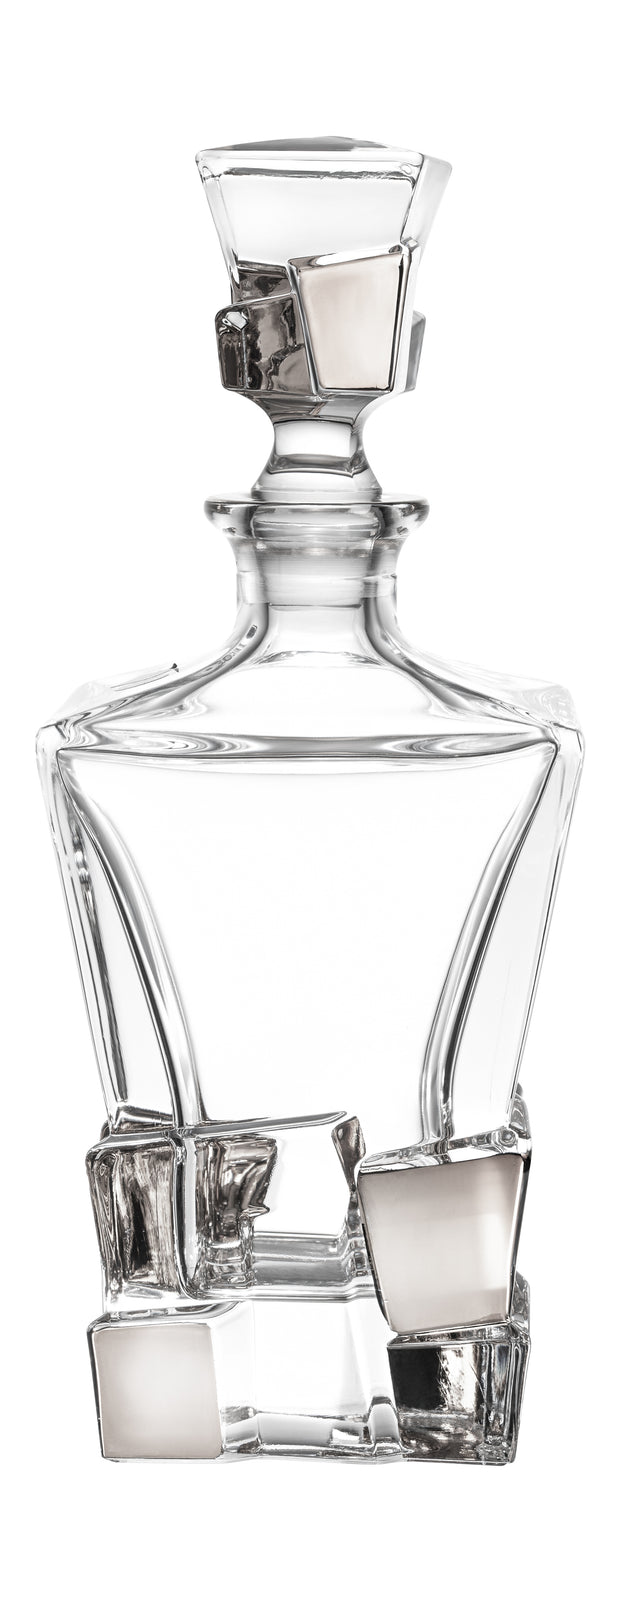 European Crystal Whiskey - Liquor Square Shaped Decanter W/ Ice Cube Design In Platinum - 28 Oz. - 11.25" Height